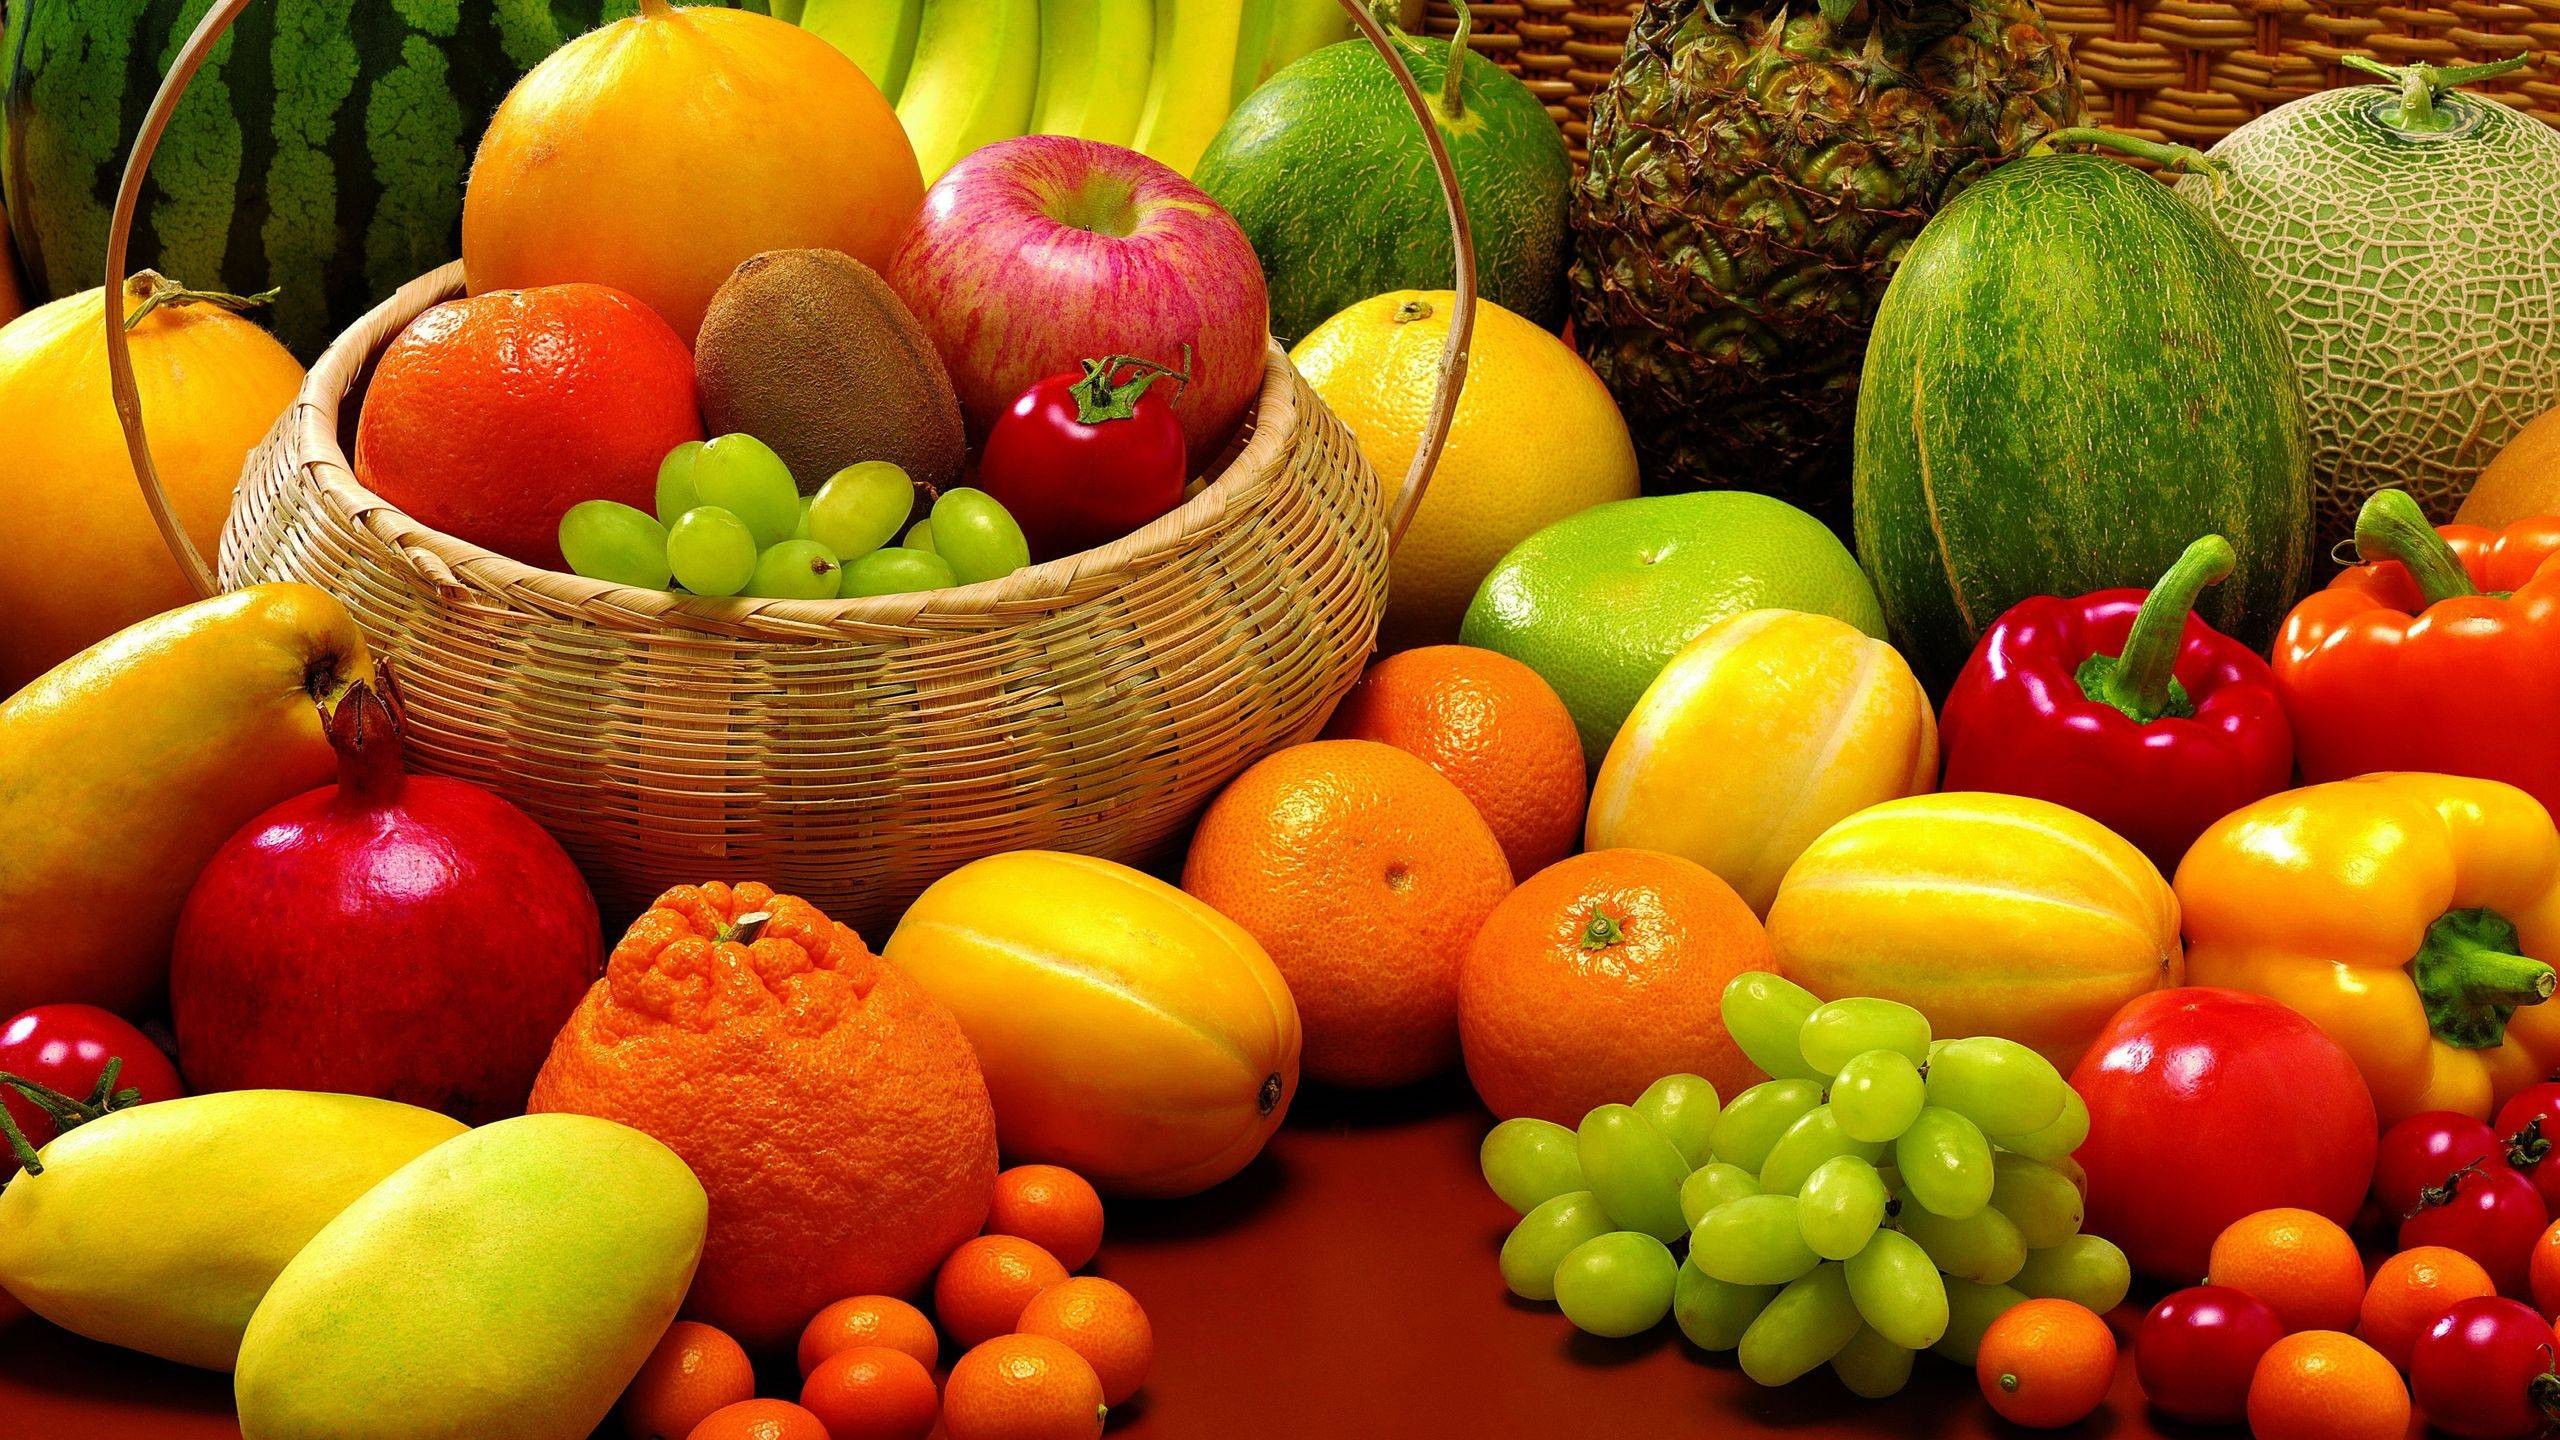 Fruit Grapes Orange Fruit Baskets Pineapples Peppers Tomatoes 2560x1440